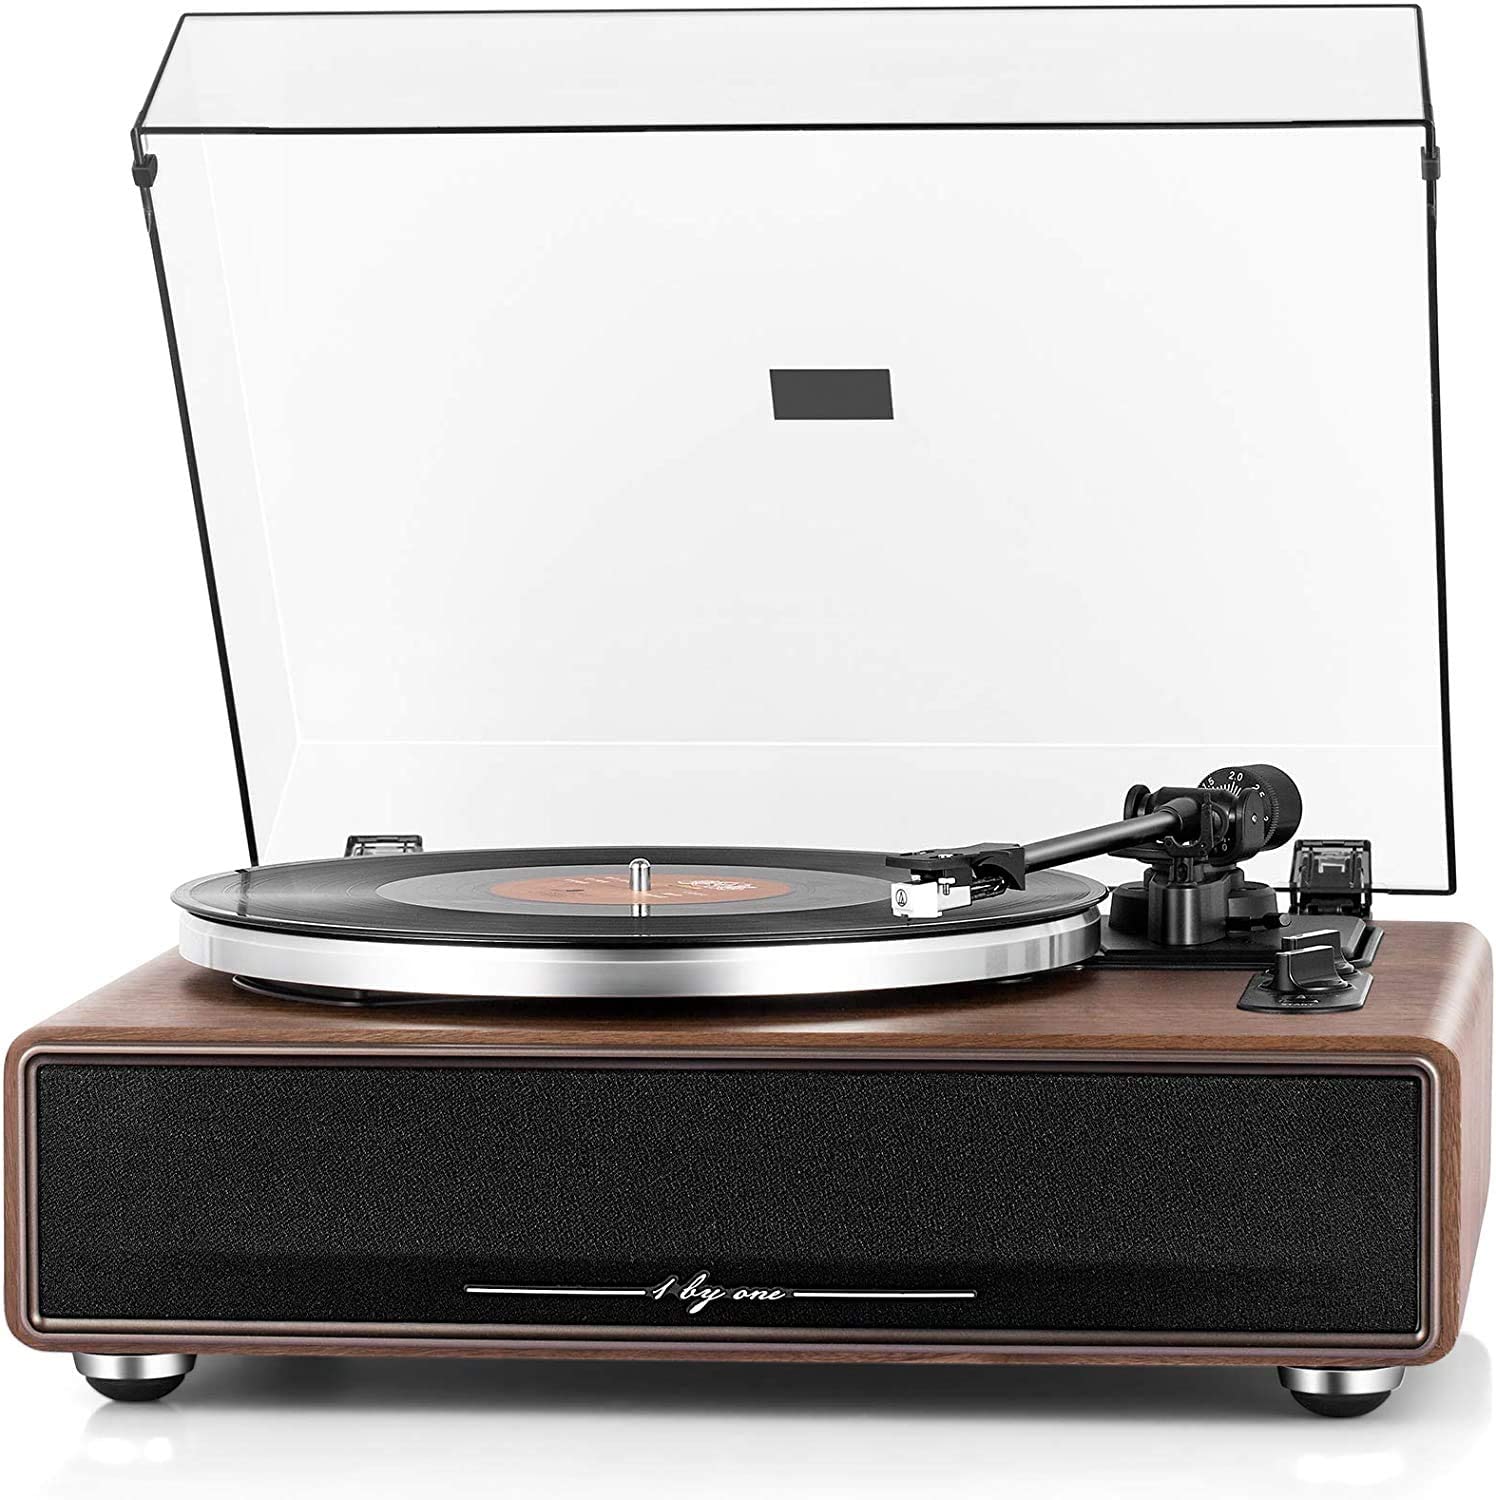 1 By One High Fidelity Record Player Review